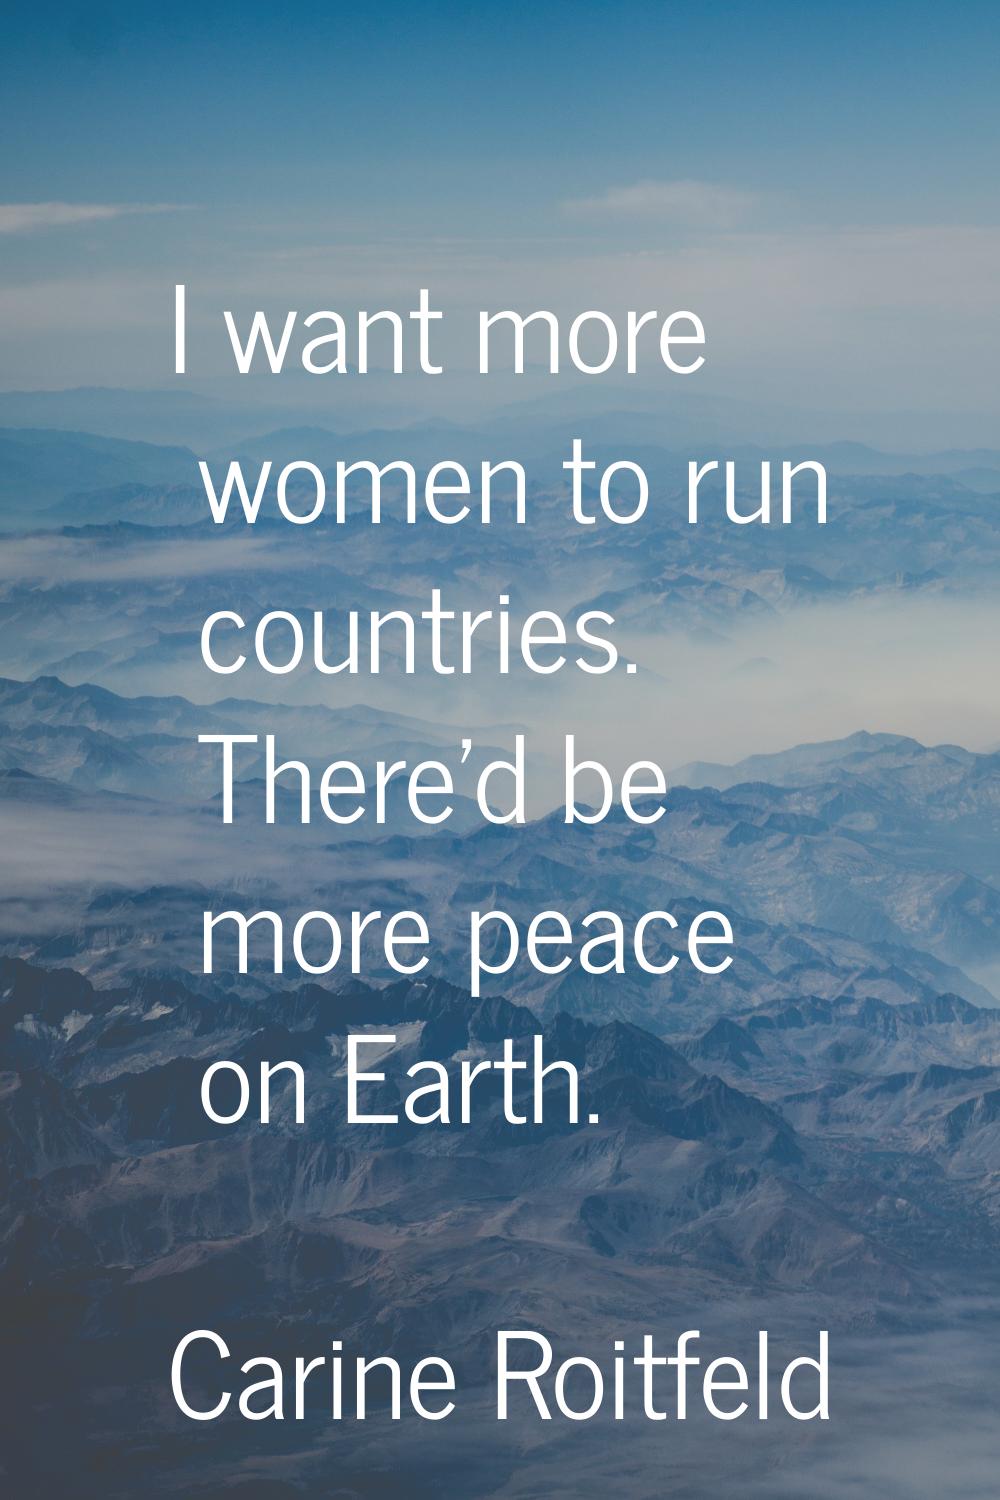 I want more women to run countries. There'd be more peace on Earth.